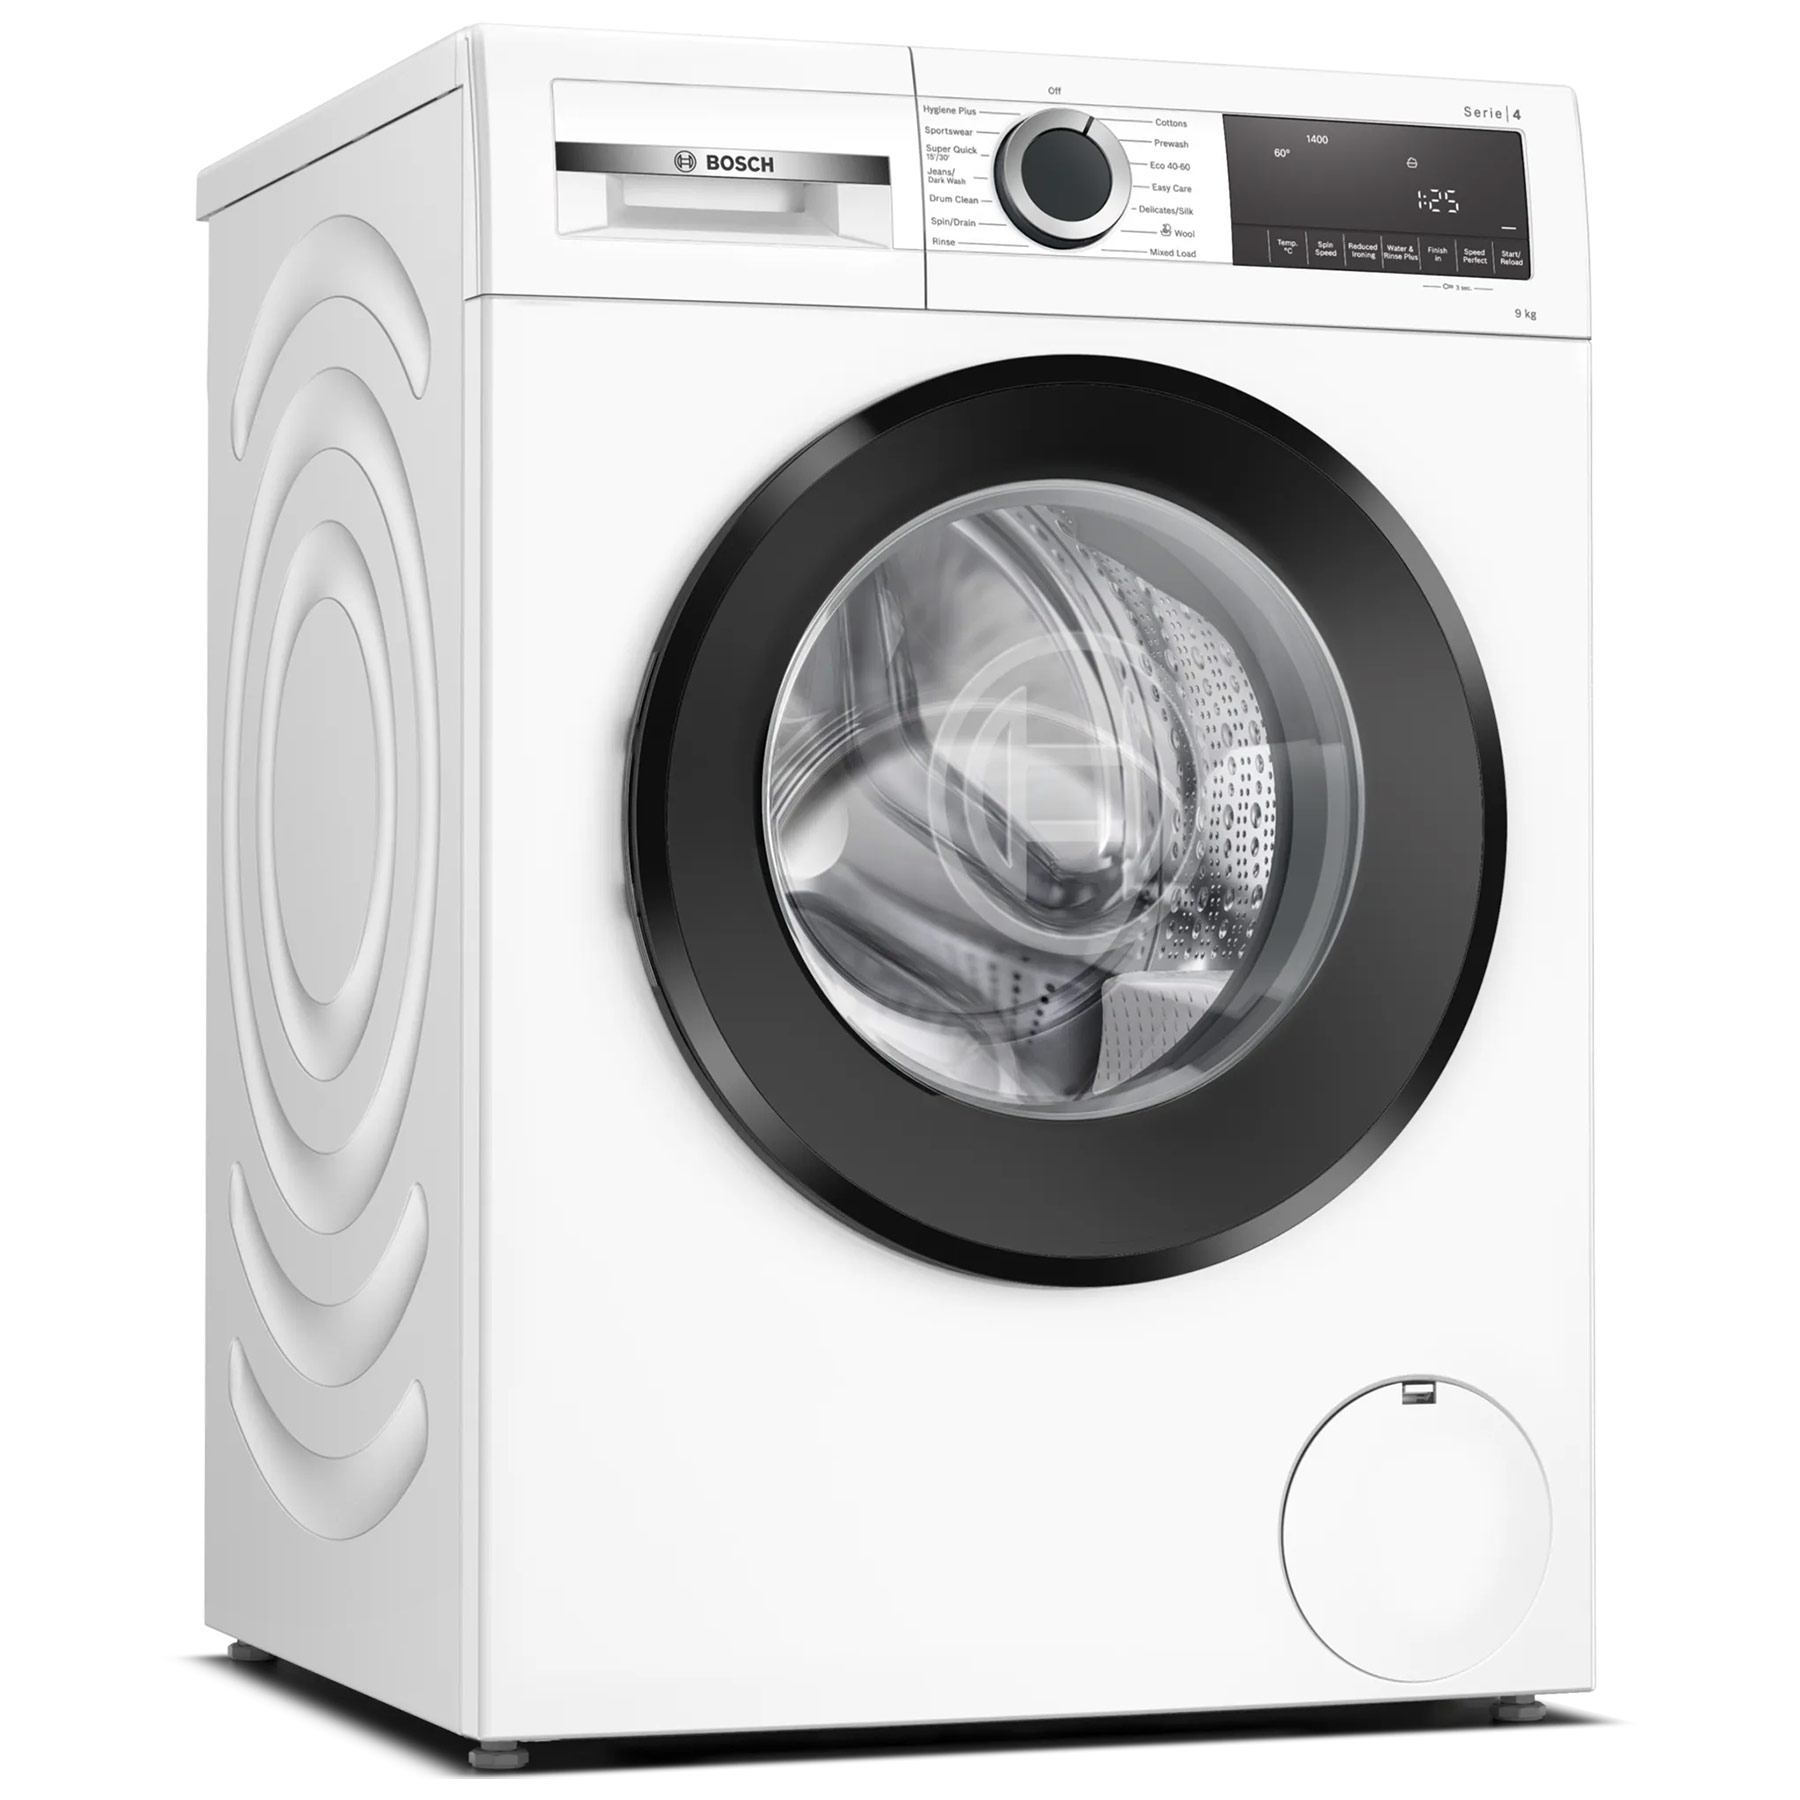 Bosch WGG04409GB Series 4 Washing Machine in White 1400rpm 9Kg A Rated